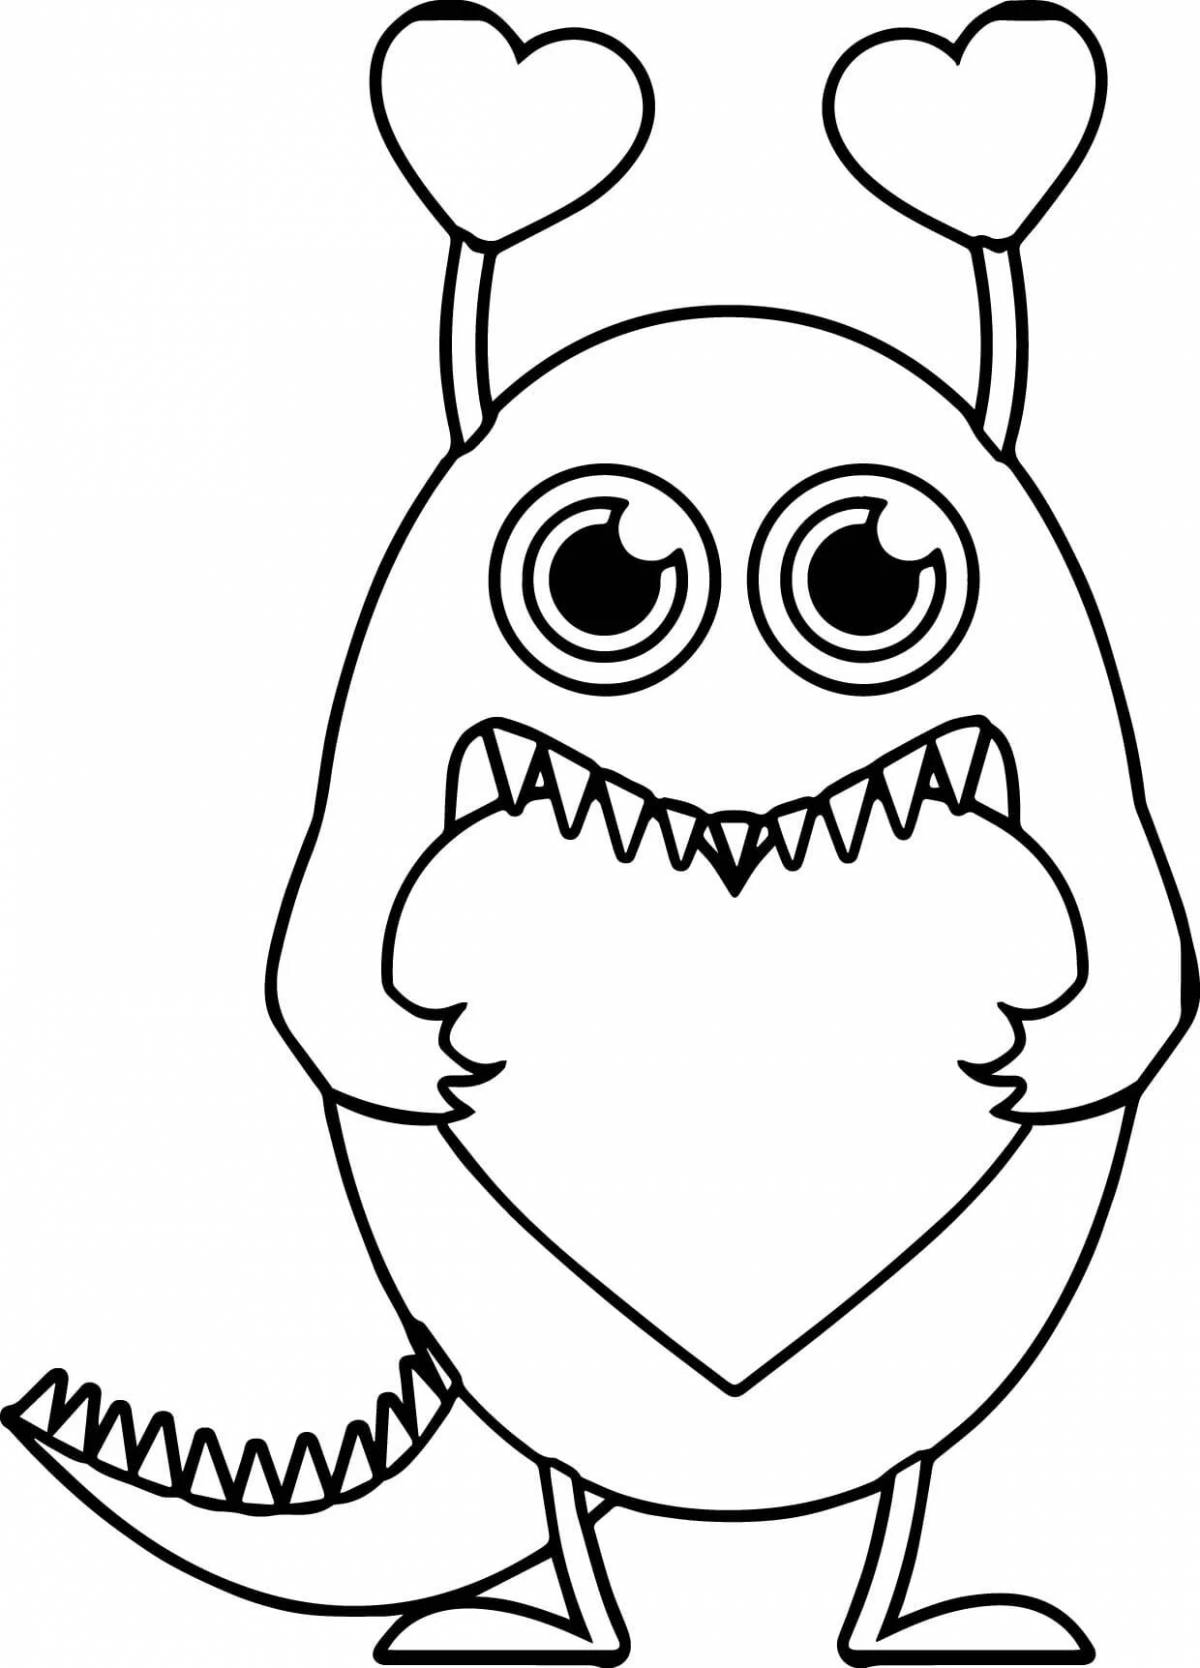 Color-explosion critter coloring page